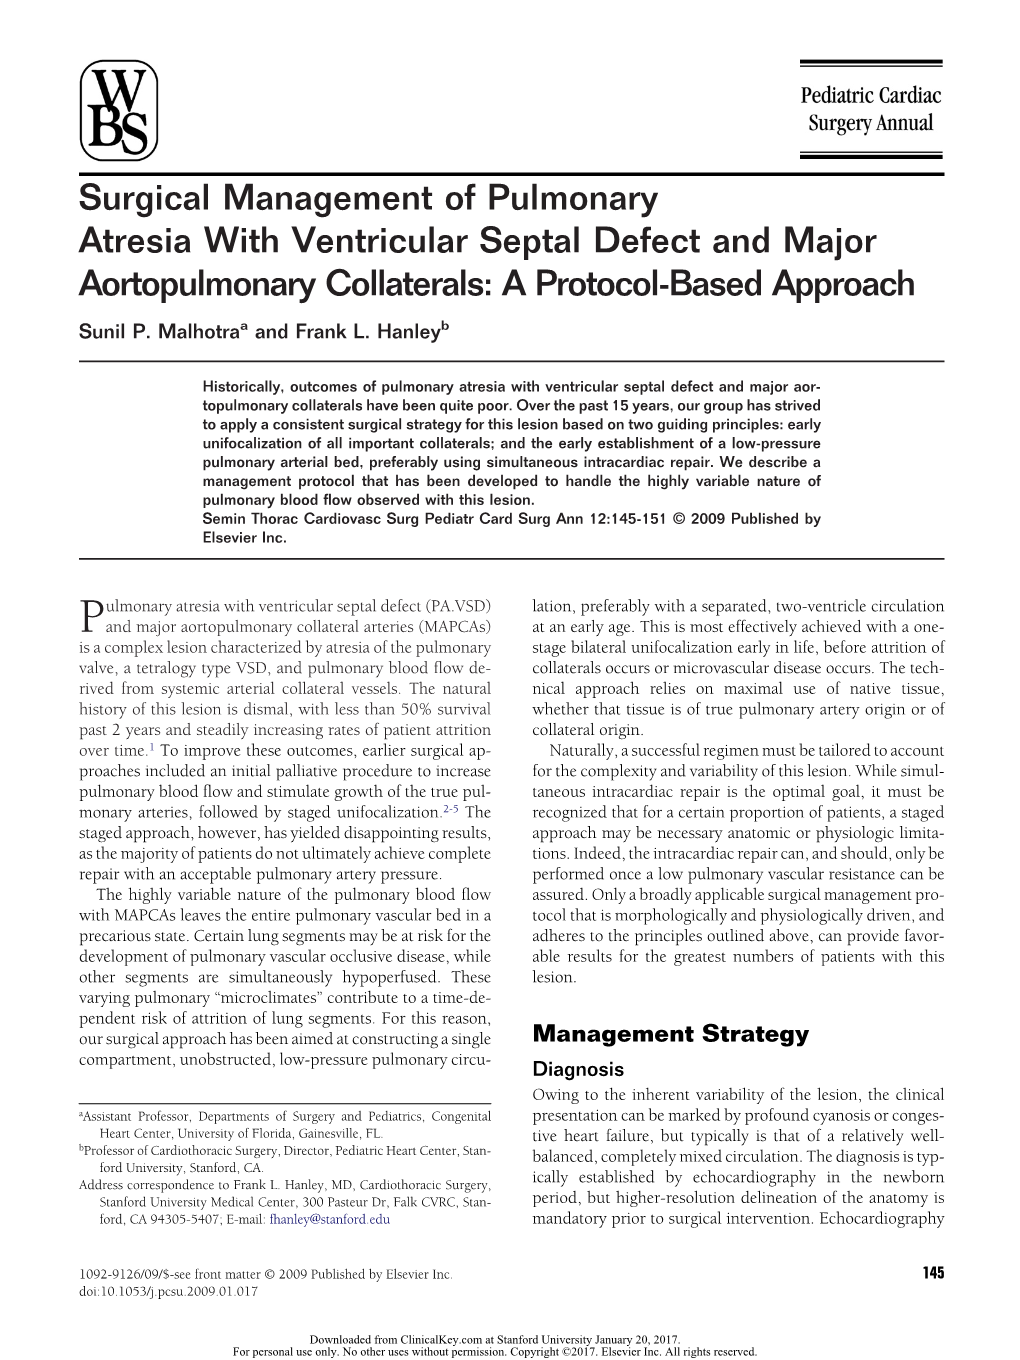 Surgical Management of Pulmonary Atresia with Ventricular Septal Defect and Major Aortopulmonary Collaterals: a Protocol-Based Approach Sunil P